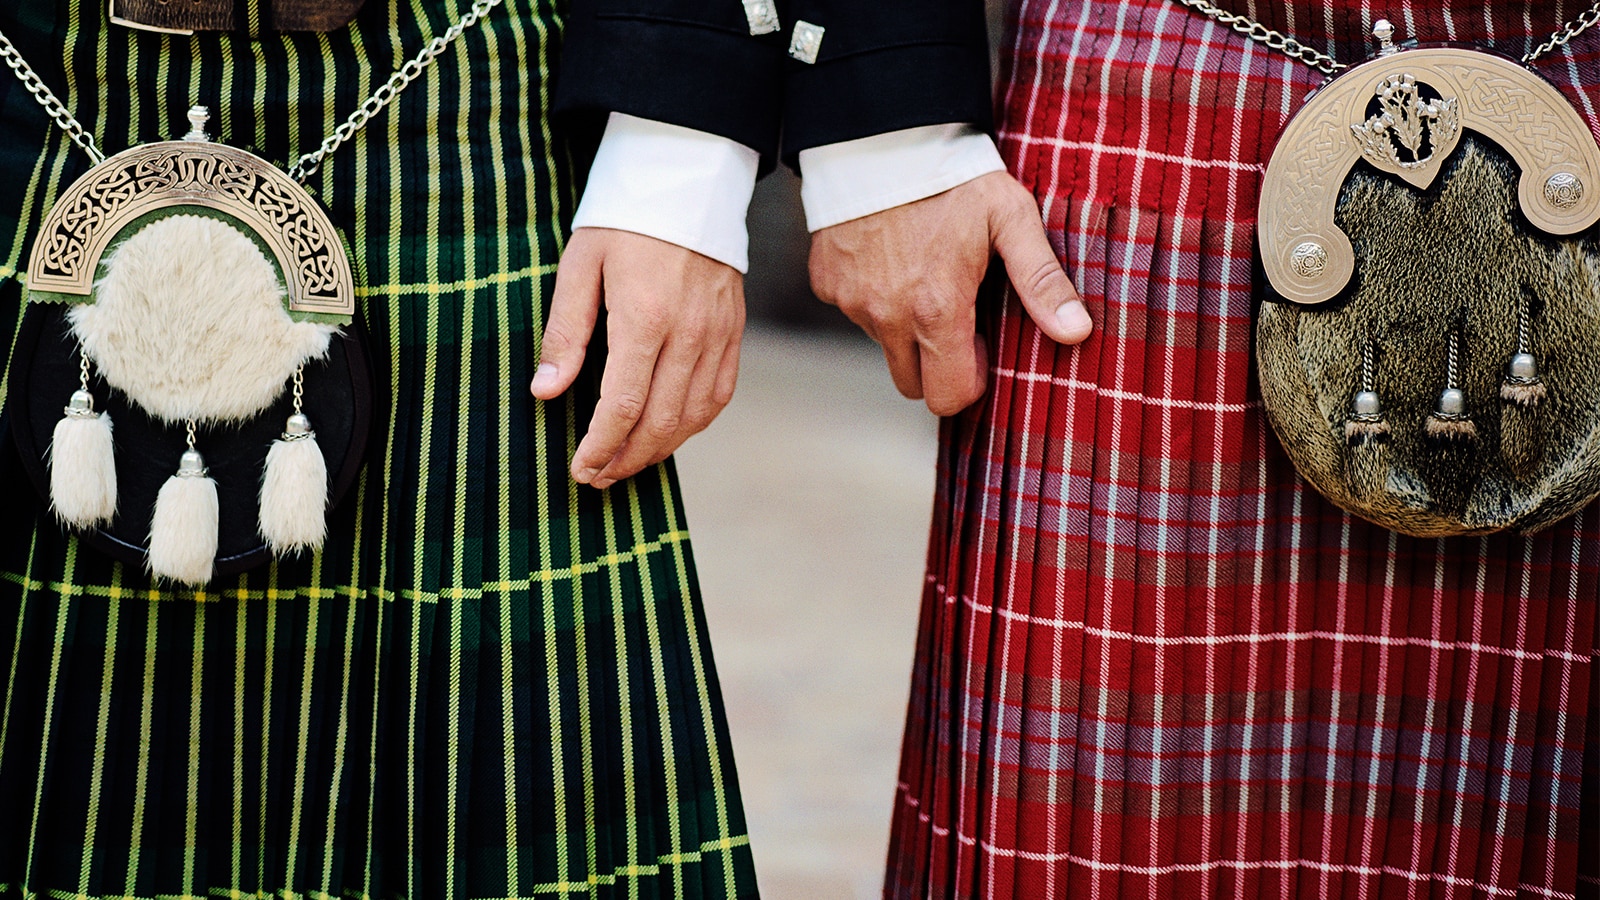 The Dos And Don'ts Of Wearing A Kilt | The Journal | MR PORTER